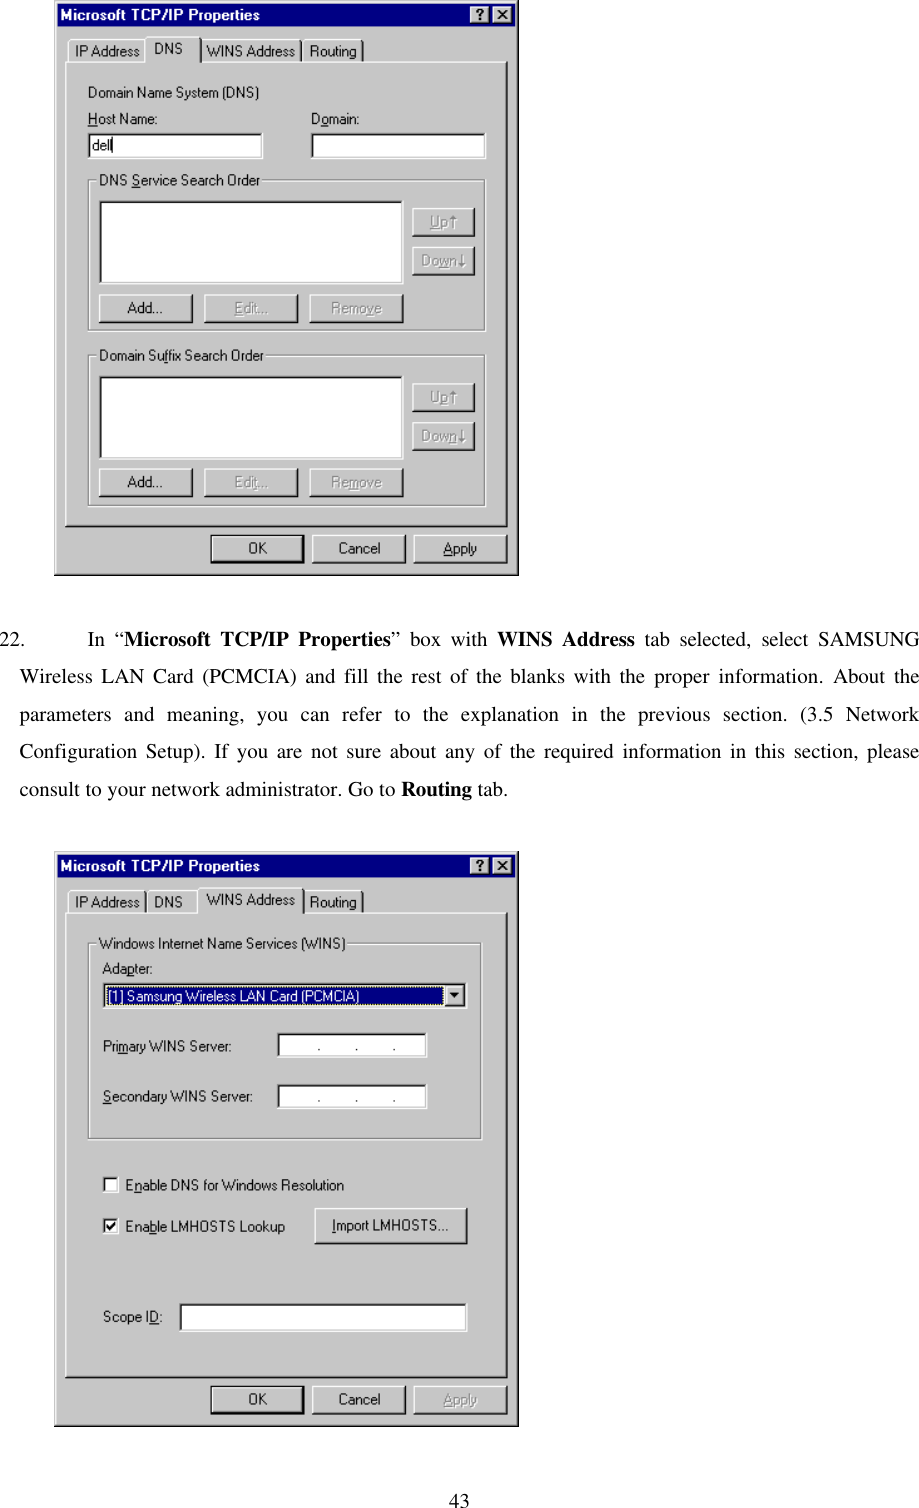 43          22. In “Microsoft TCP/IP Properties” box with WINS Address tab selected, select SAMSUNGWireless LAN Card (PCMCIA) and fill the rest of the blanks with the proper information. About theparameters and meaning, you can refer to the explanation in the previous section. (3.5 NetworkConfiguration Setup). If you are not sure about any of the required information in this section, pleaseconsult to your network administrator. Go to Routing tab.          